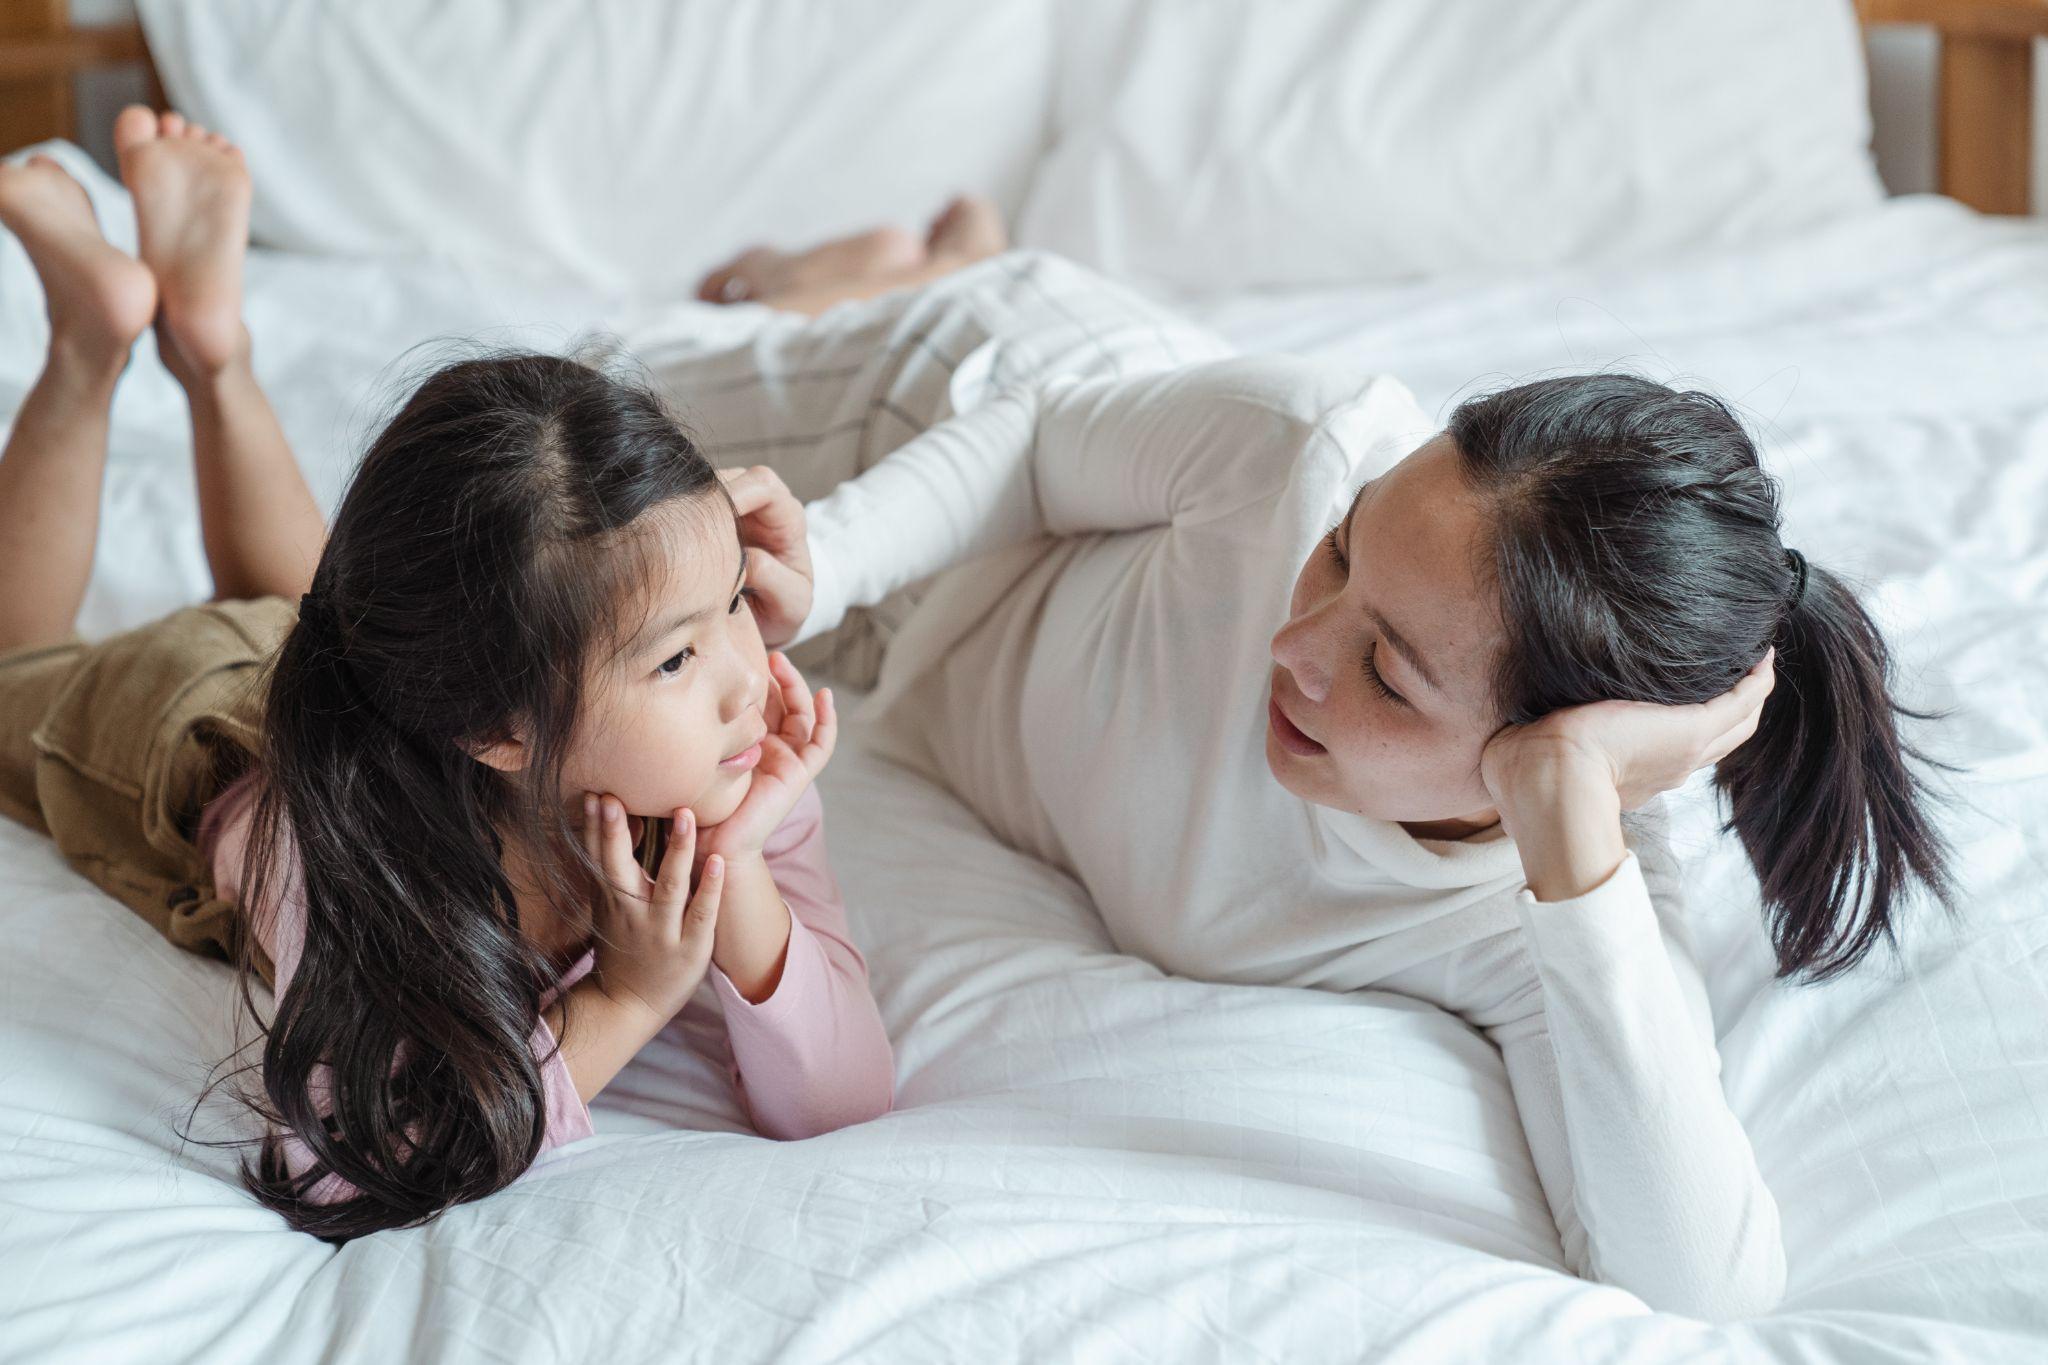 Woman talking to a young child while lying on a bed.